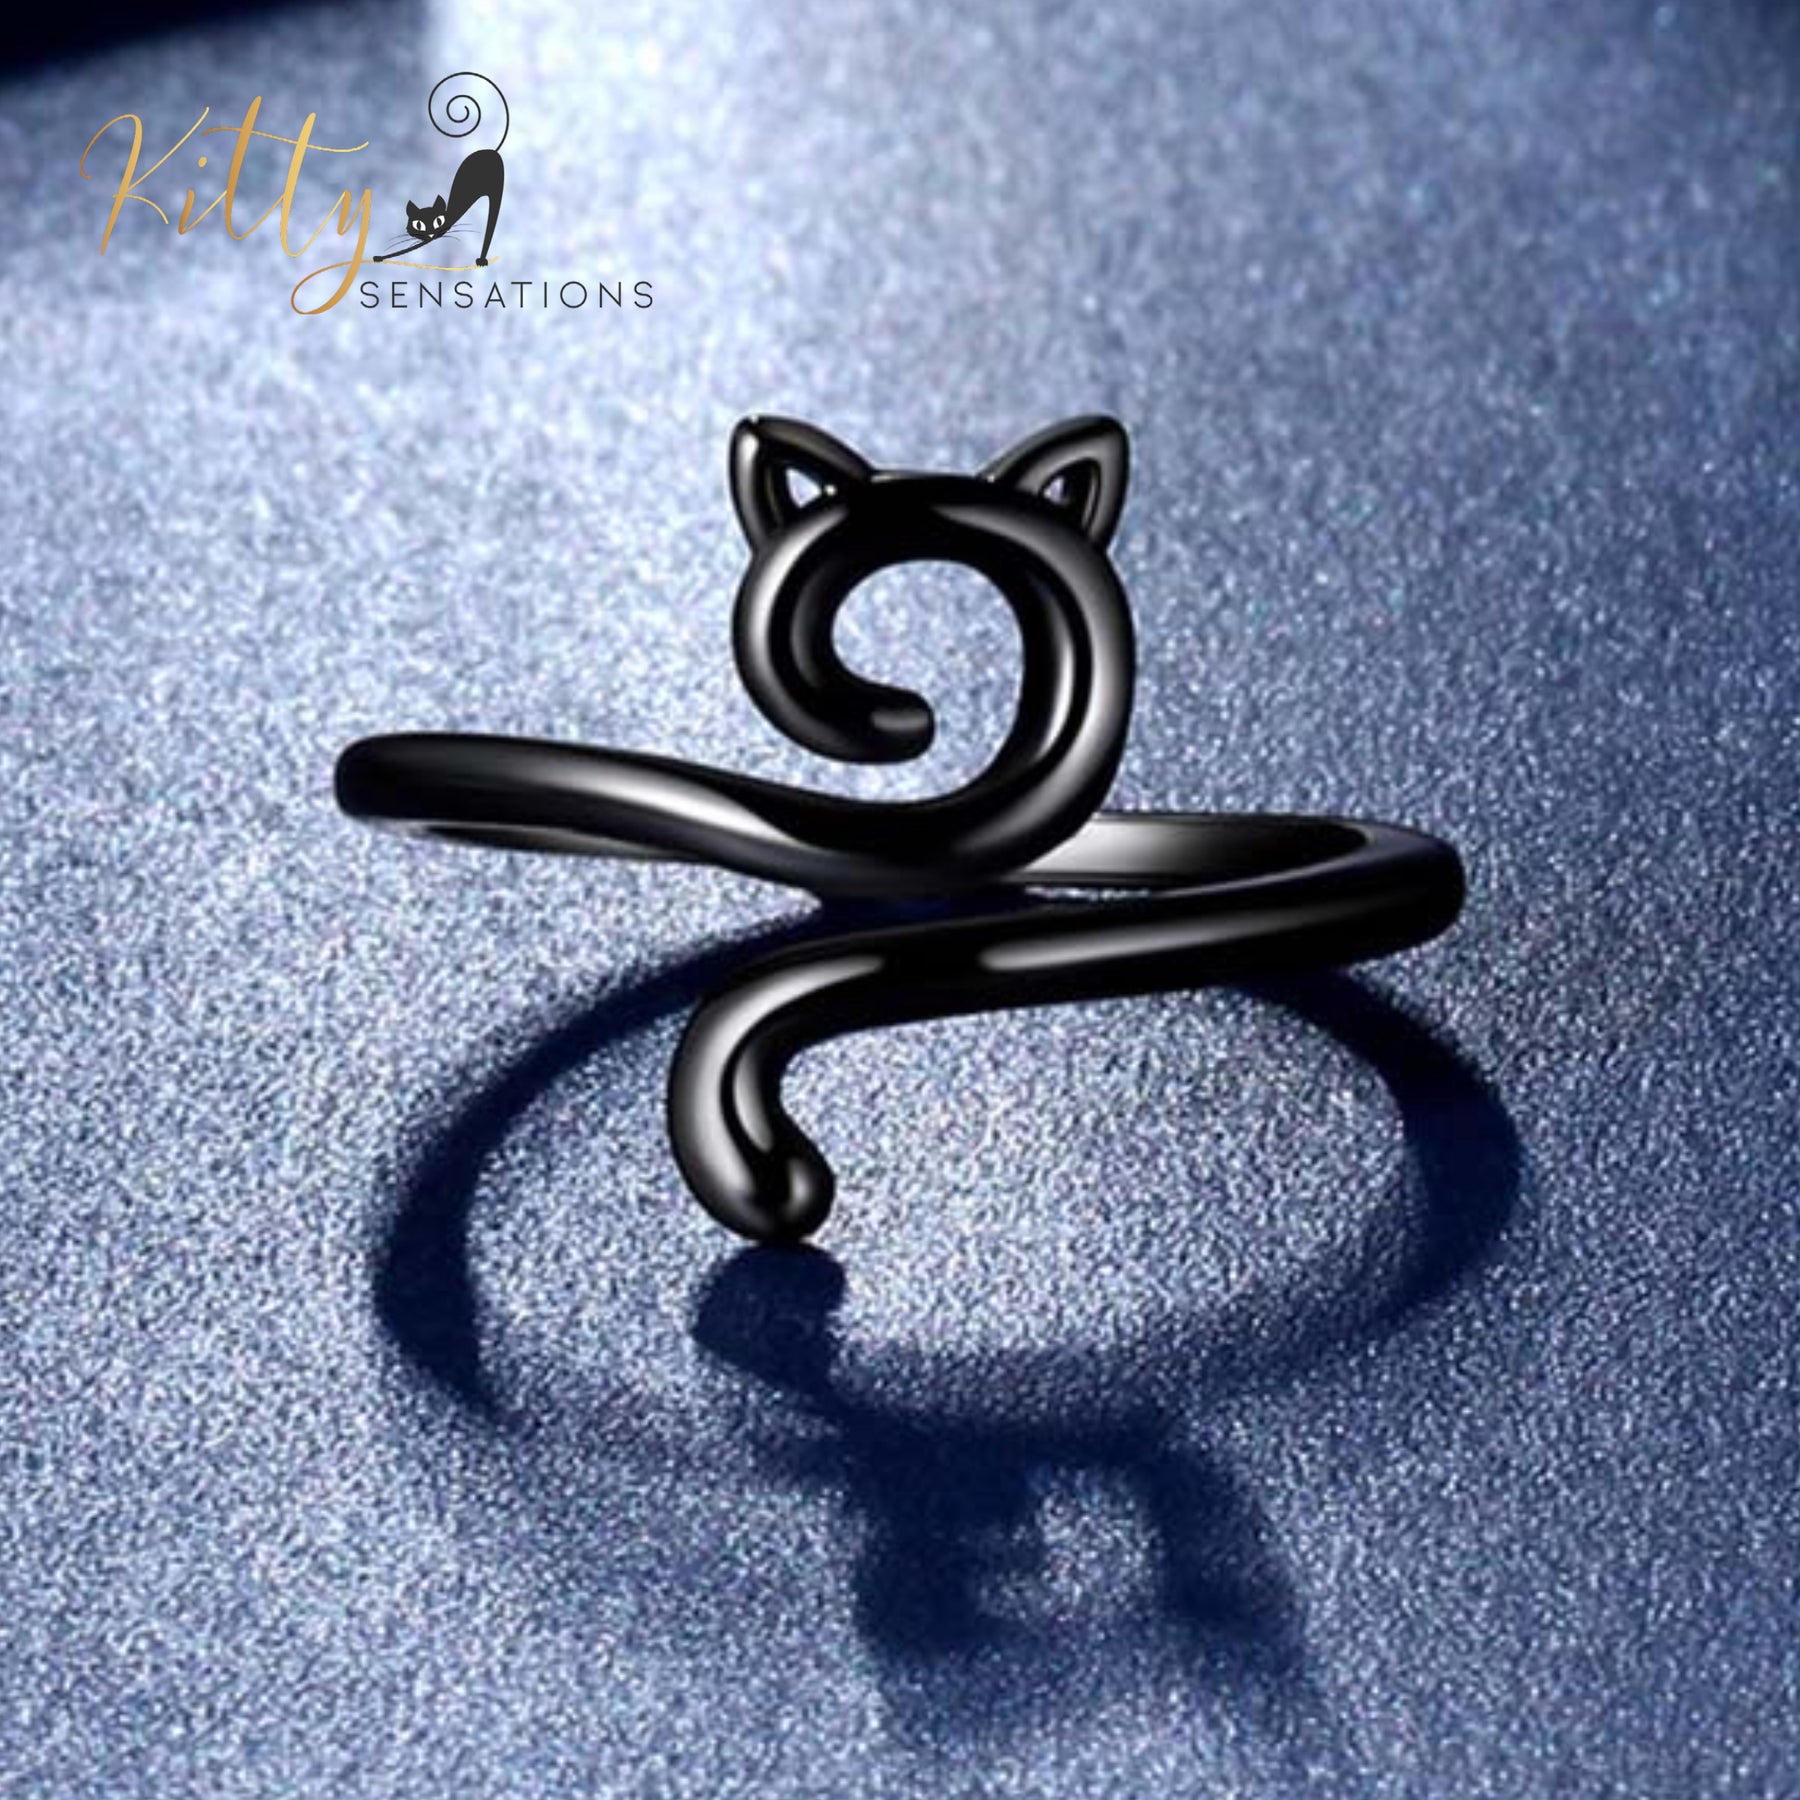 www.KittySensations.com: Open Face and Tail Cat Ring (Silver or Black) - Adjustable Size ($28): https://www.kittysensations.com/products/open-face-and-tail-cat-ring-silver-or-black